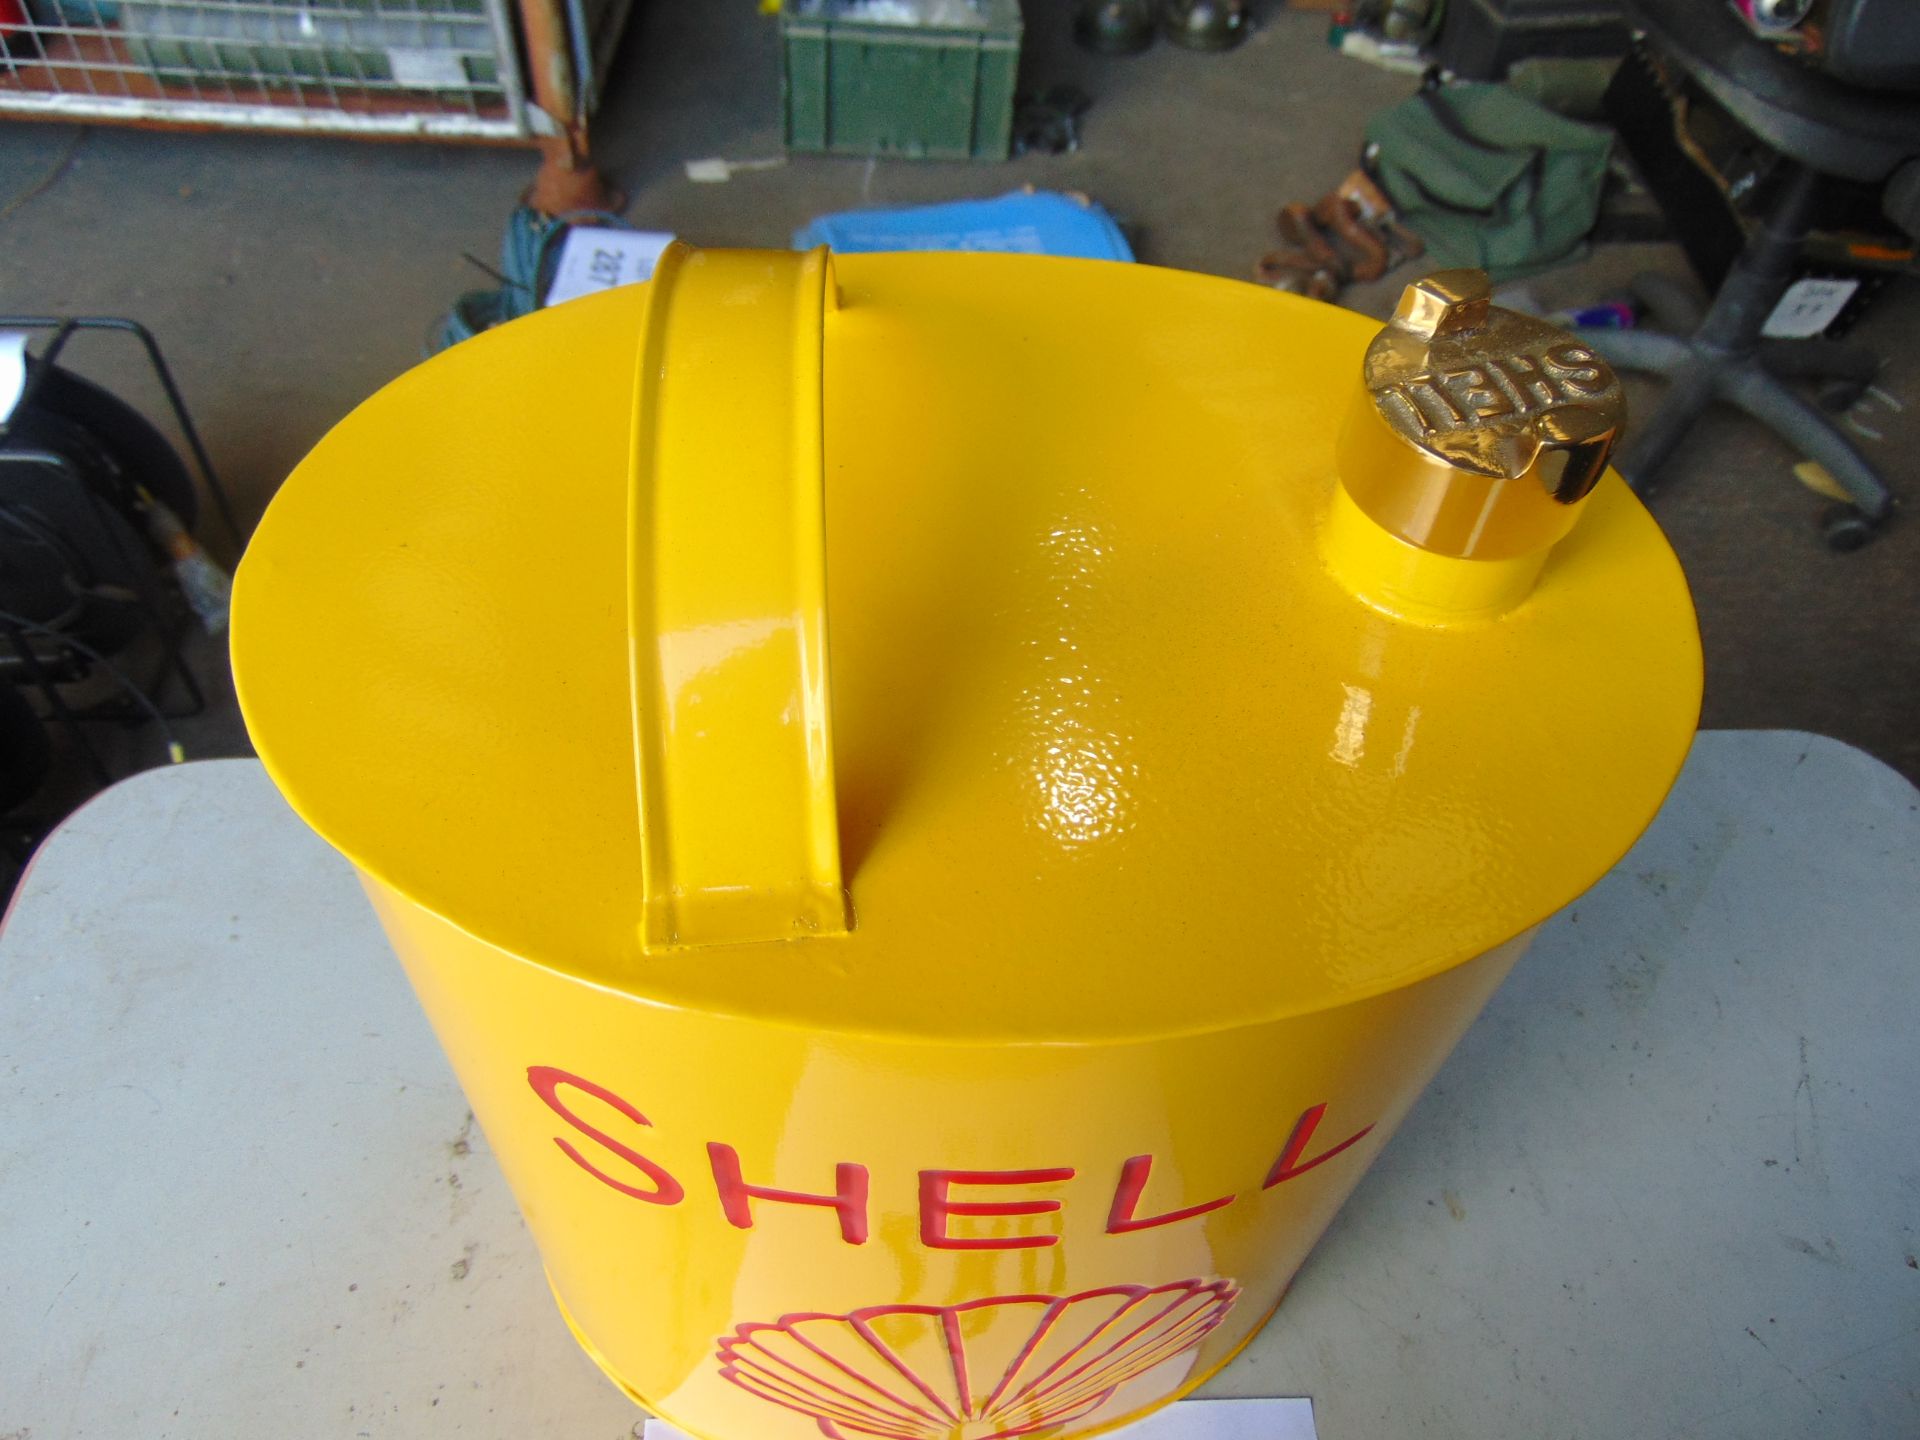 New and Unused Shell 2 Gall Oil can c/w Brass Cap - Image 2 of 3